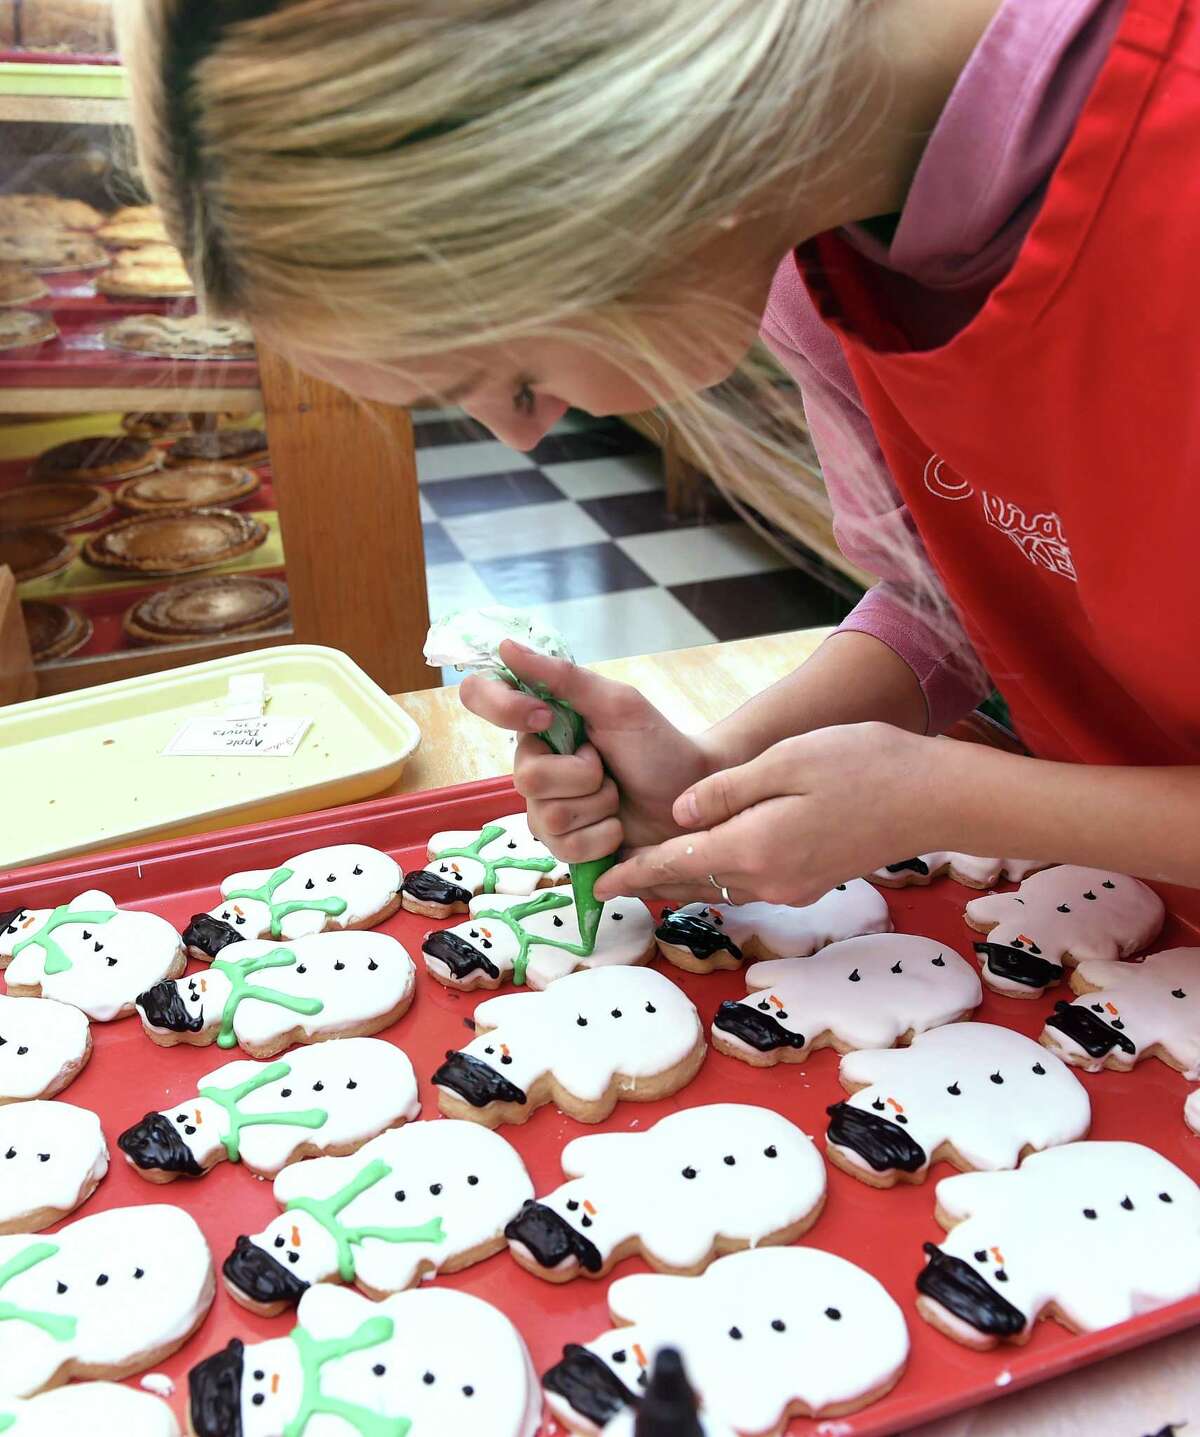 A woman decorates snowmen sugar cookies with icing. Homemade holiday treats will be among the offerings Saturday at holiday fairs hosted by two Middletown churches.